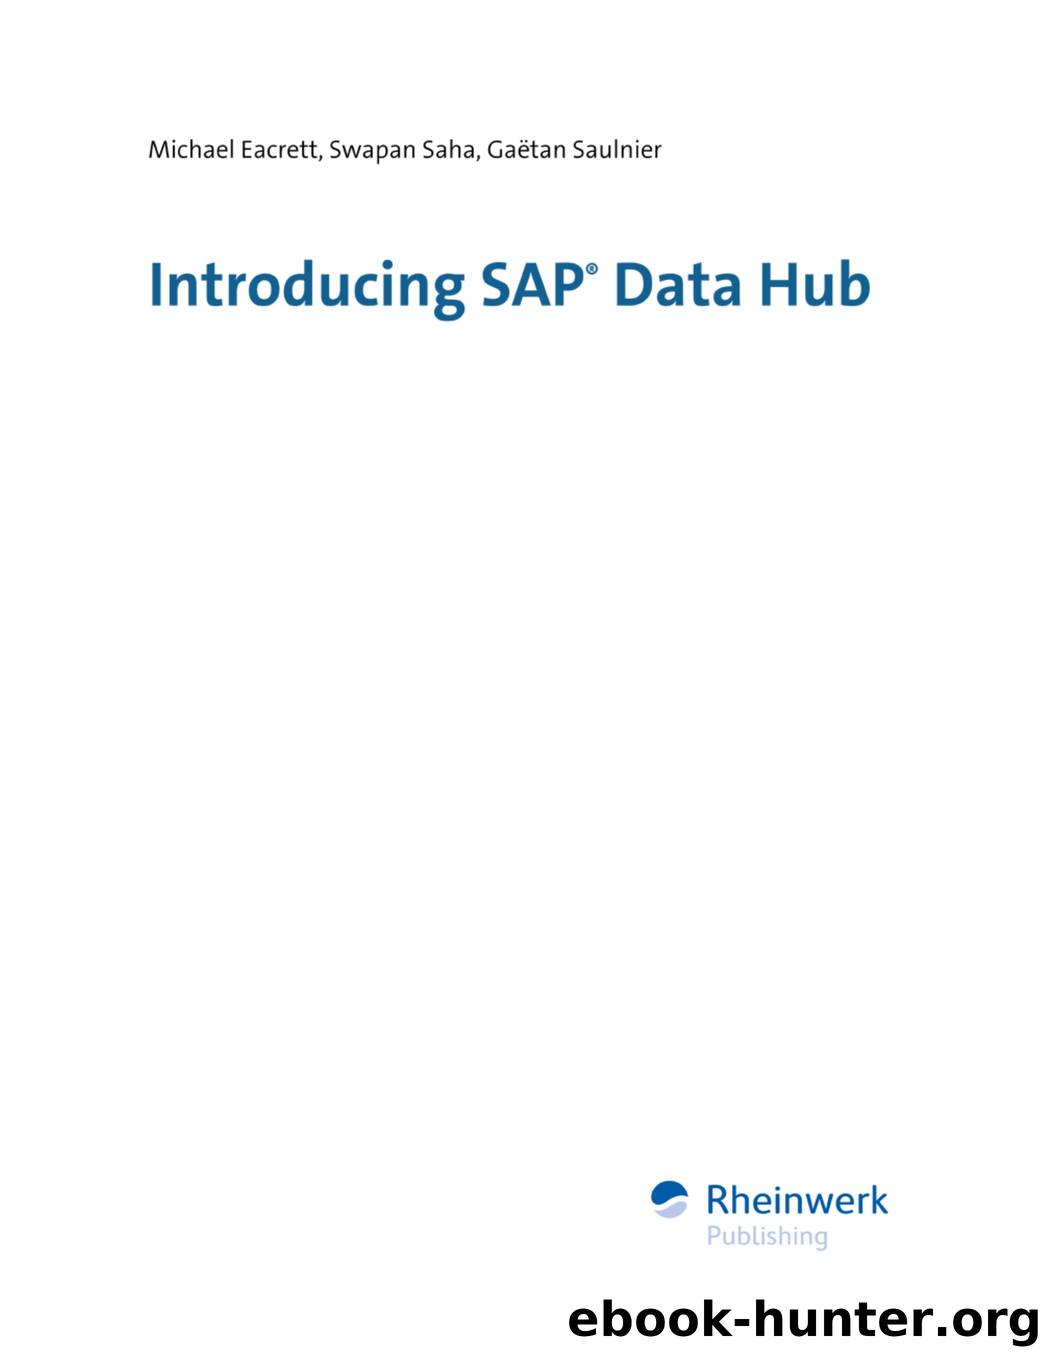 Introducing SAP Data Hub by Unknown